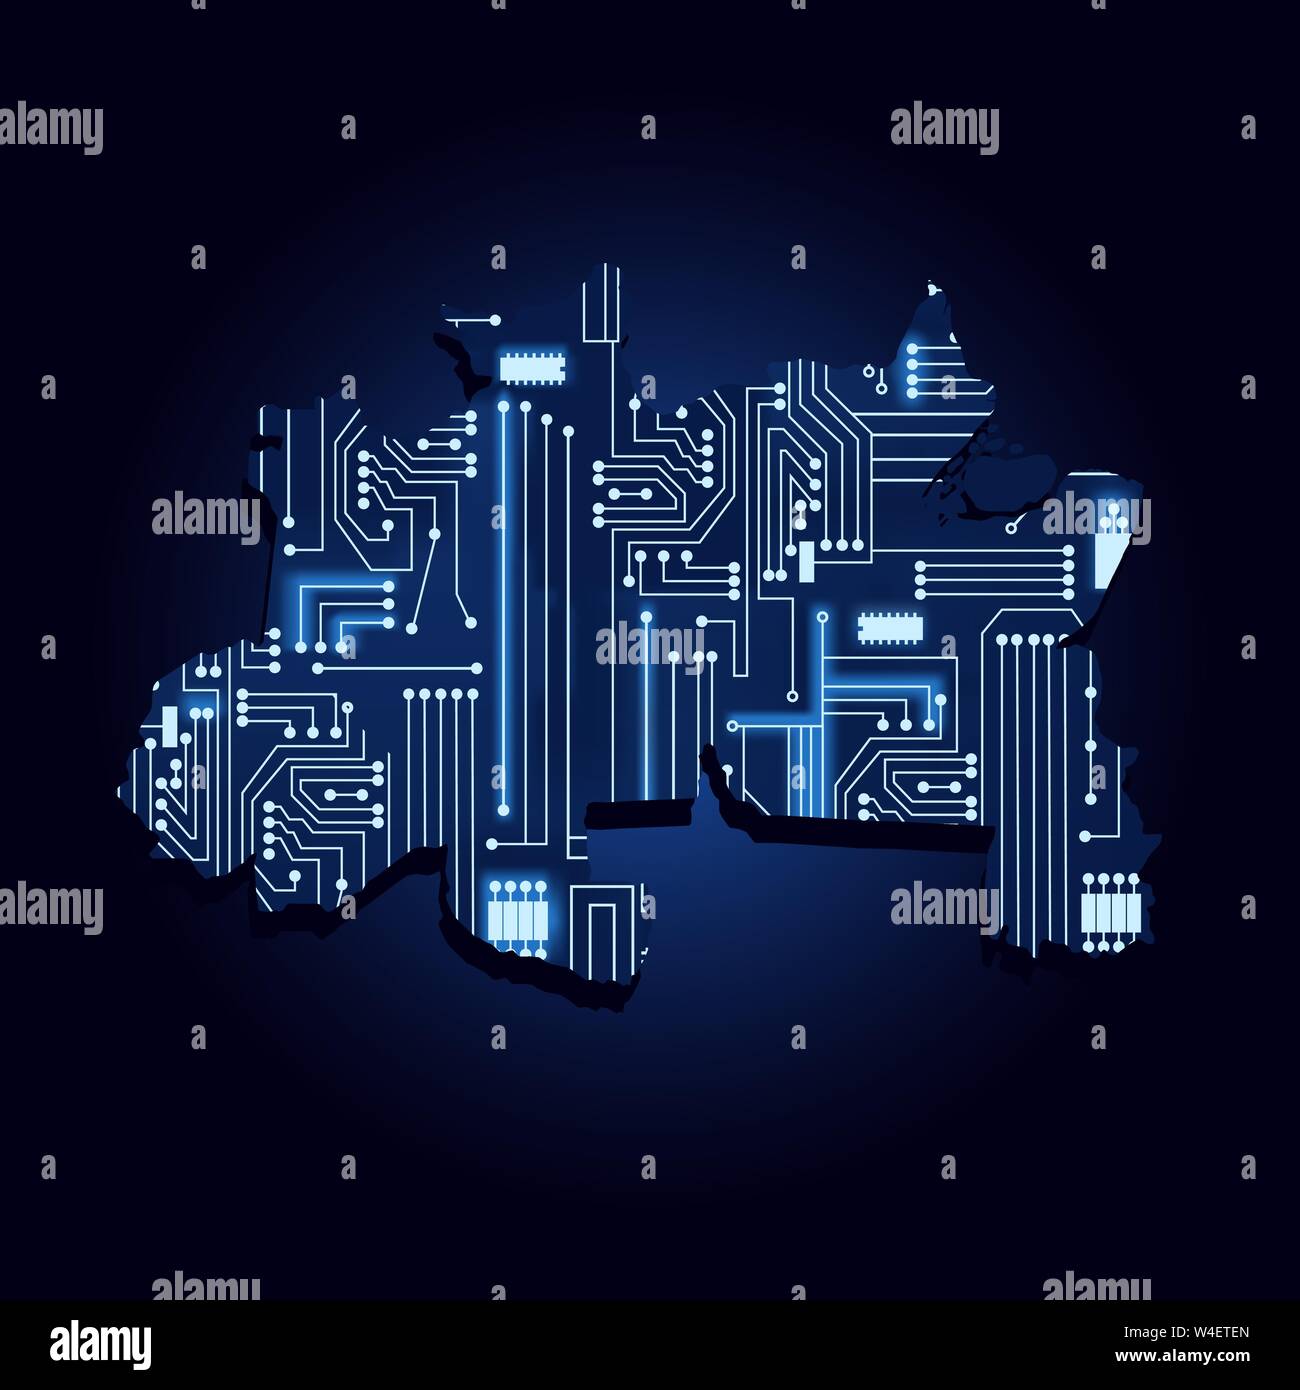 Contour map of North of Brazil with a technological electronics circuit. Brazilian region. Blue background. Stock Vector